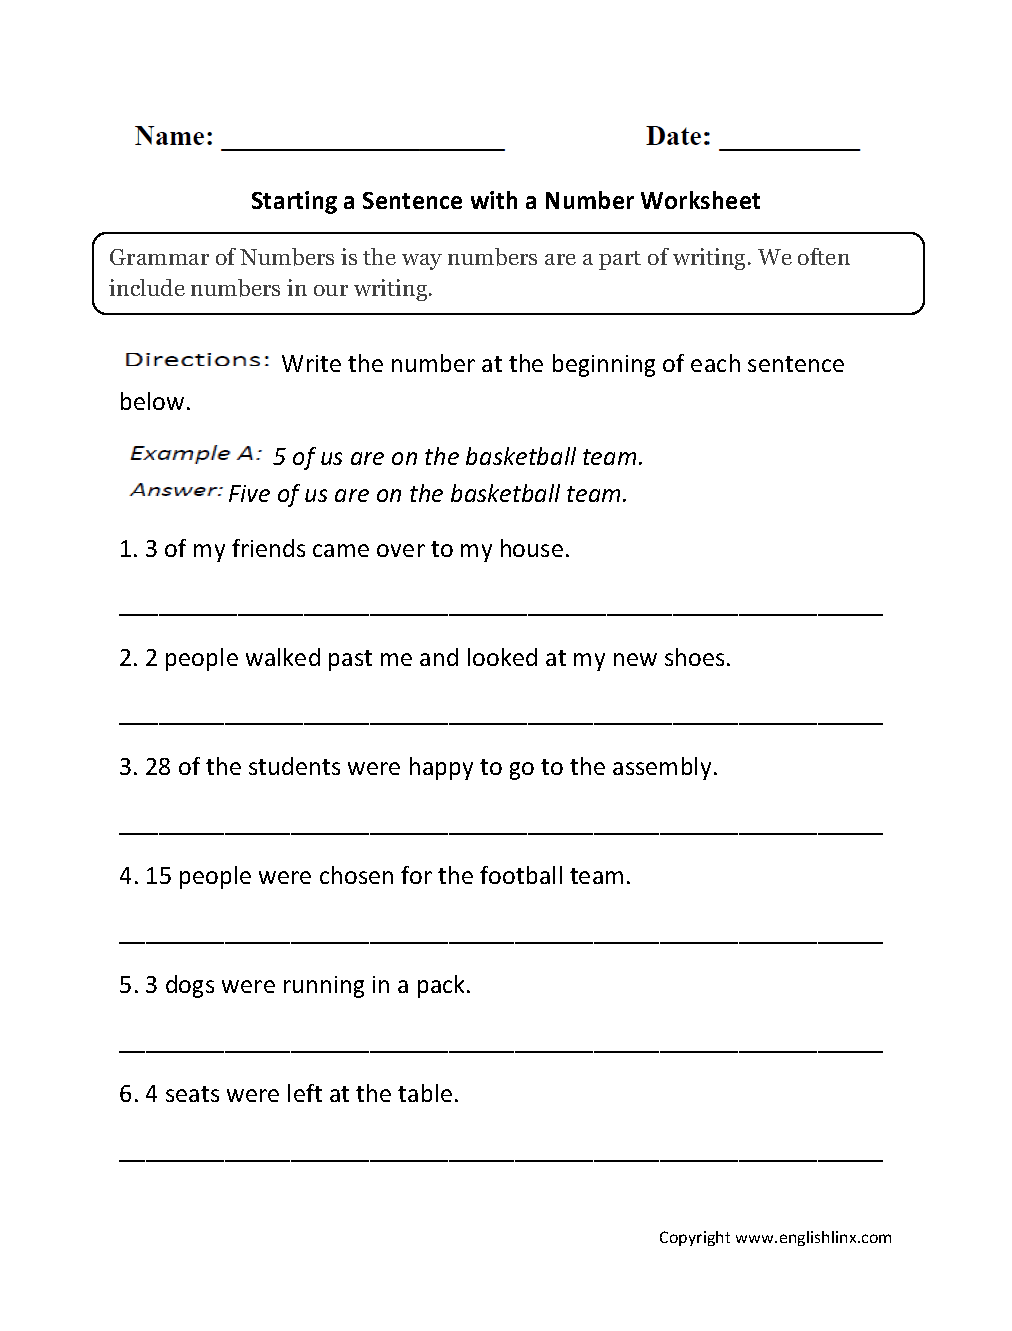 identifying-a-sentence-as-complete-or-incomplete-part-1-turtle-diary-worksheet